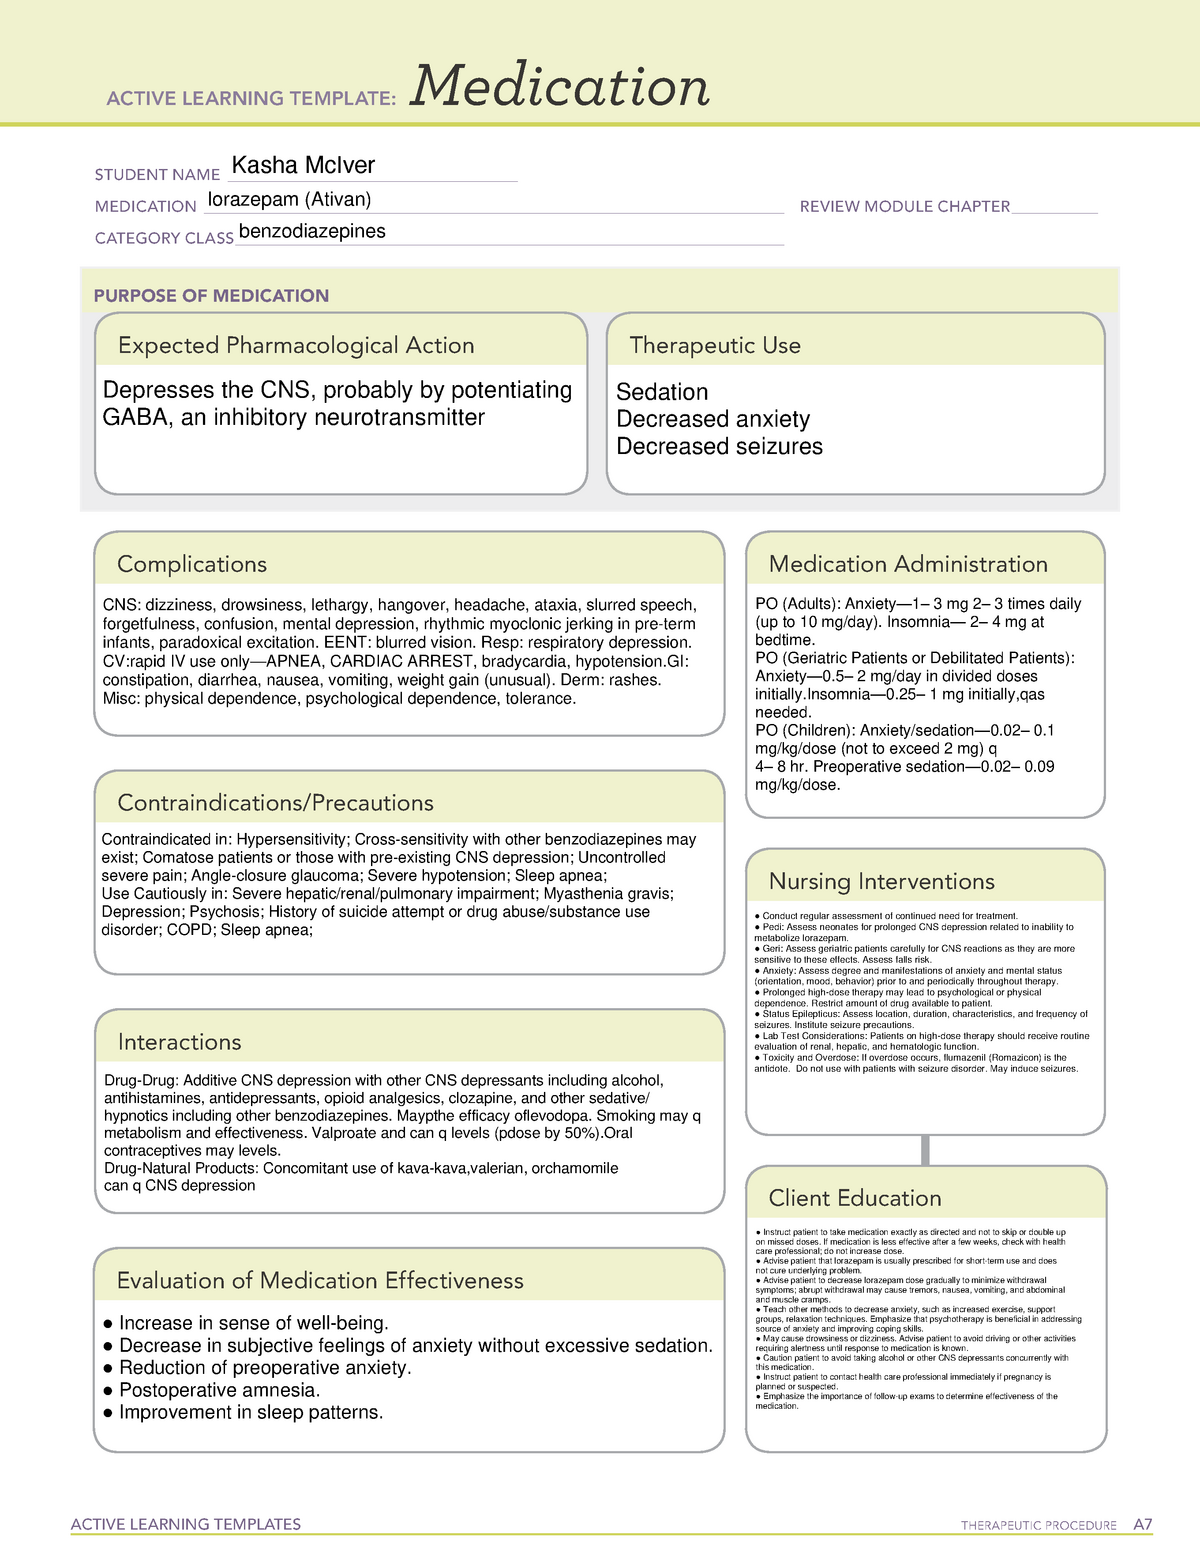 Ativan drug card for maternity clinical ACTIVE LEARNING TEMPLATES